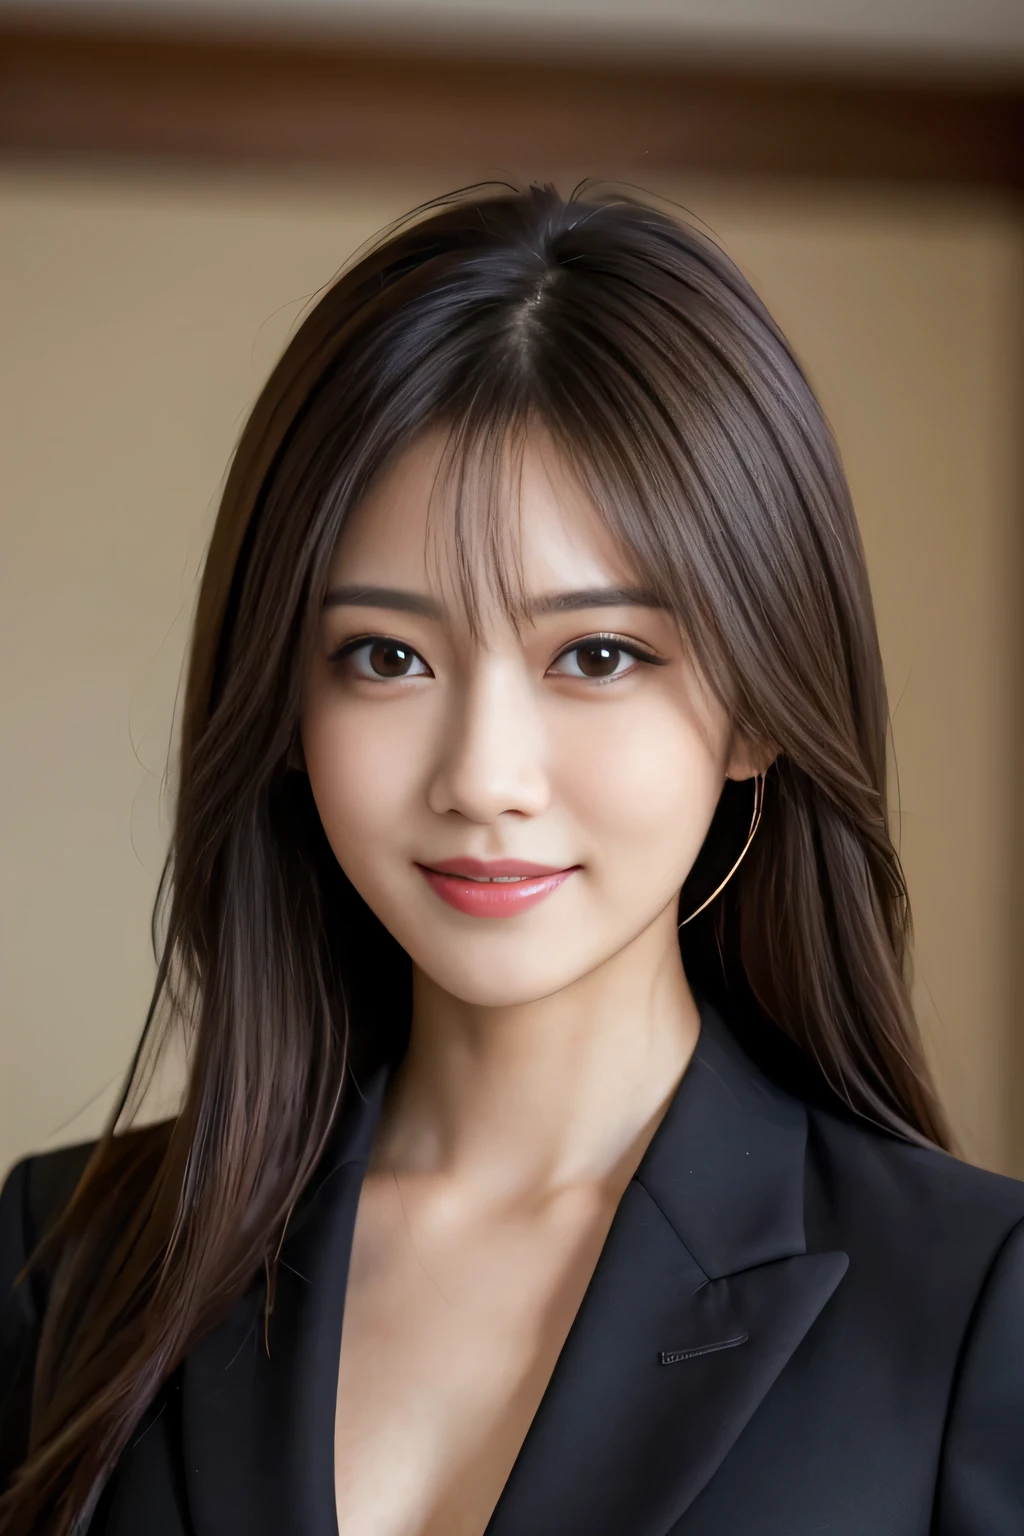 Best quality, realistically, ultra - detailed, Detailed pubic hair, A high resolution, 8k wallpaper, 1 Beautiful woman,,light brown messy hair, Wear a dark suit, lock focus, Perfect dynamic composition, beautidful eyes, Delicate hair, Detailed realistically skin texture, Smiling, closeup portrait, Model body type